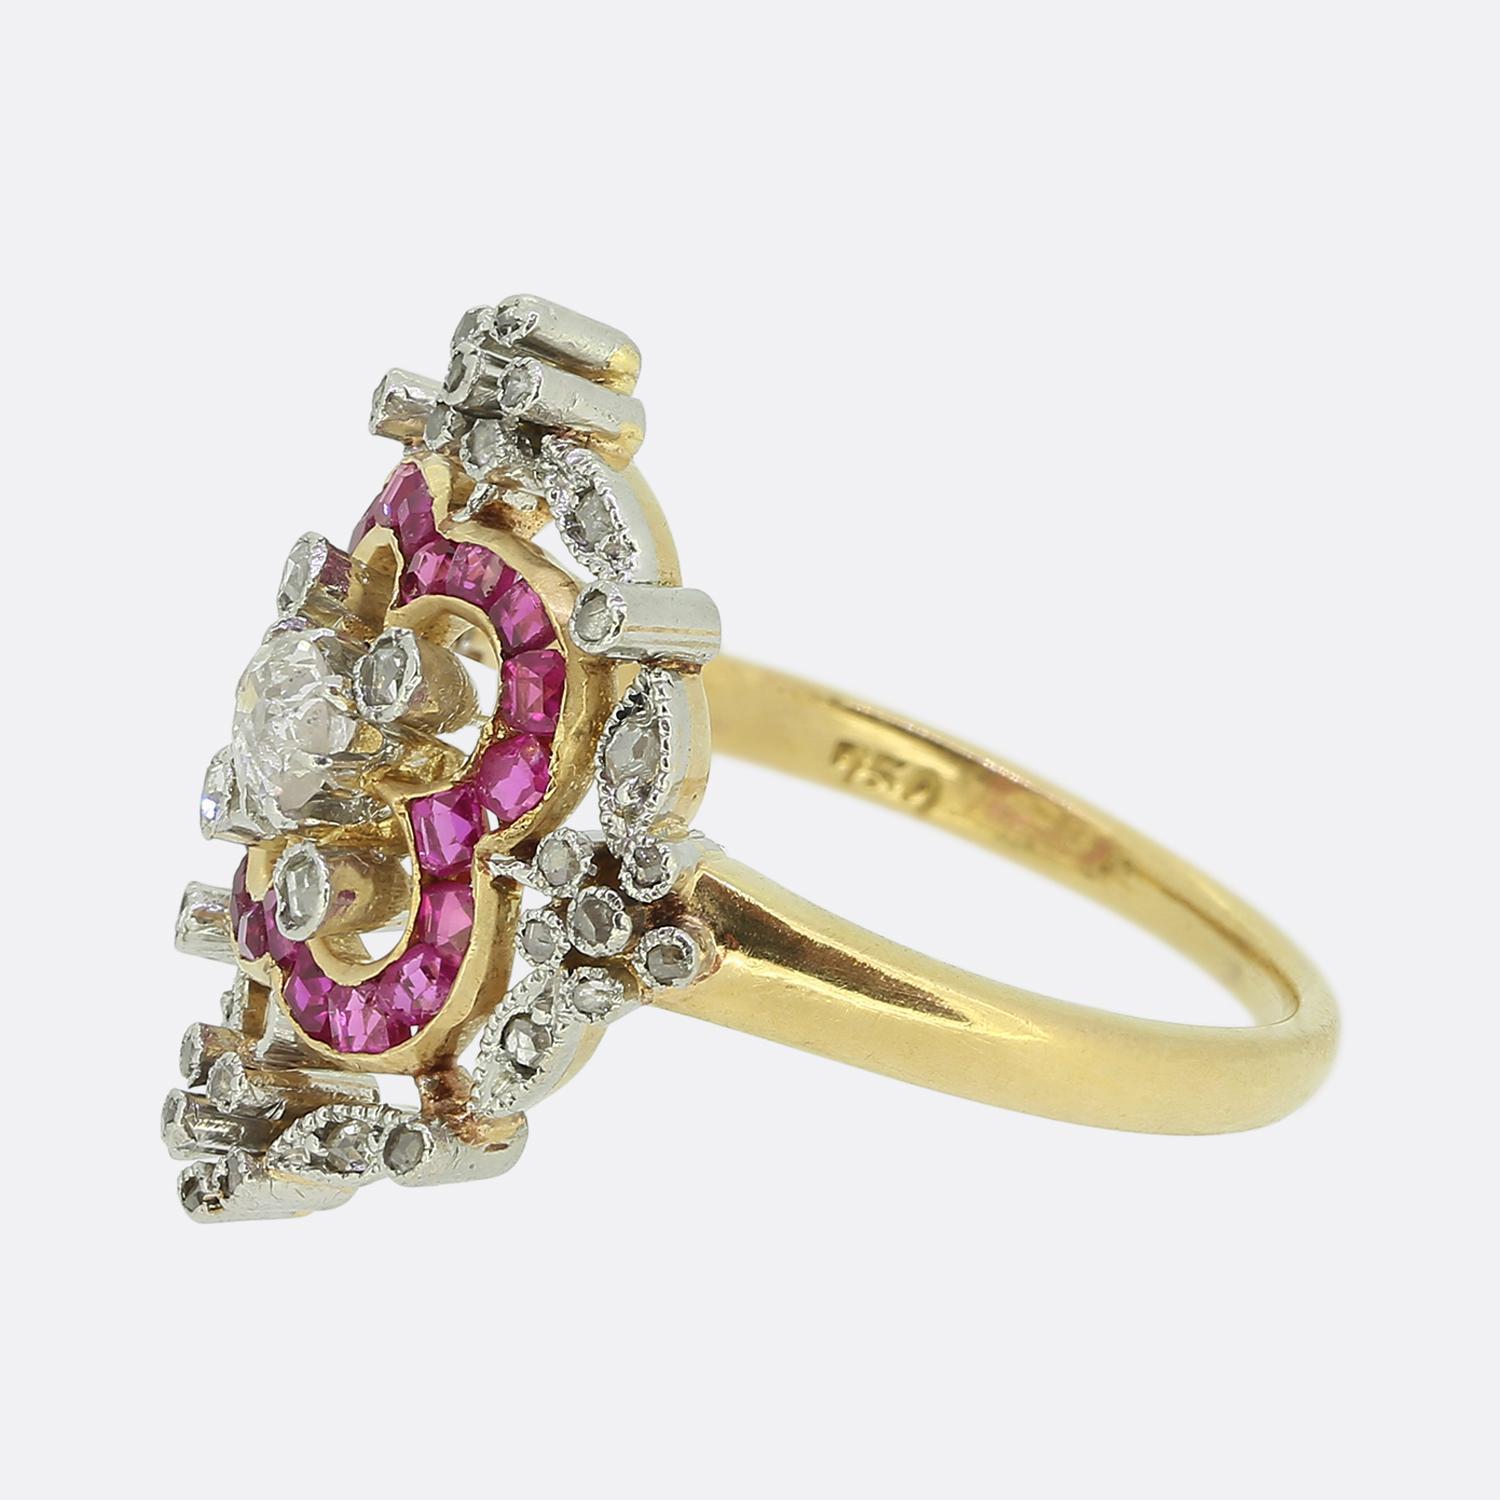 Here we have a stunning cluster ring crafted during the early stages of the 20th century. A single round faceted old mine cut diamond sits slightly risen at the centre of an open face in an 8 clawed setting with four rose cut diamonds at each corner